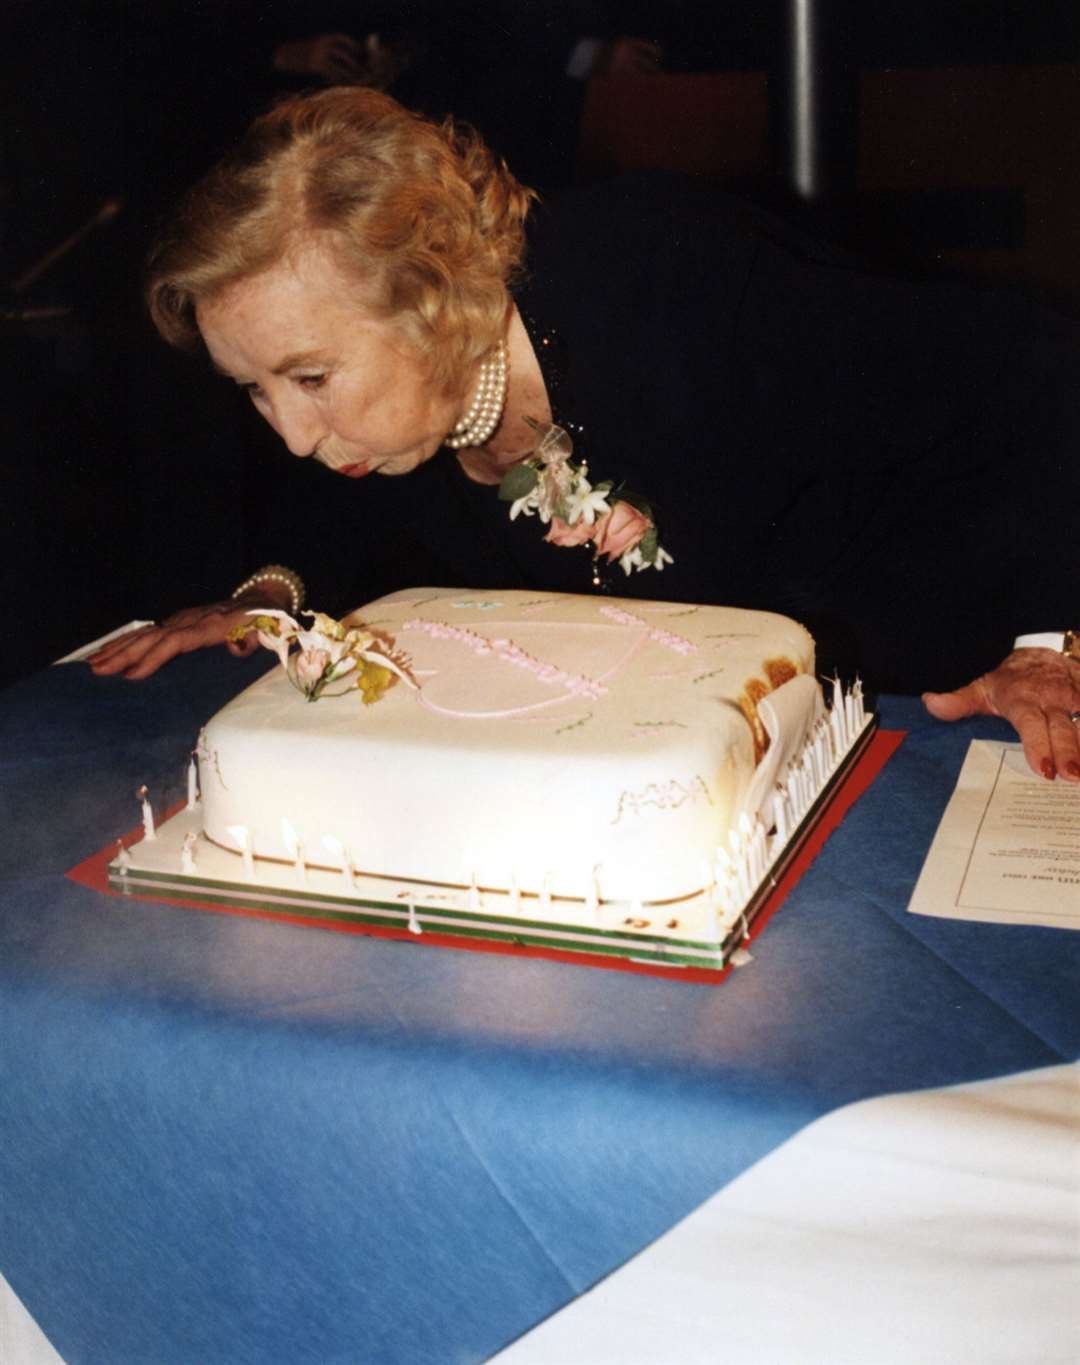 Blowing out birthday candles in 1997 at age 80 (PA)